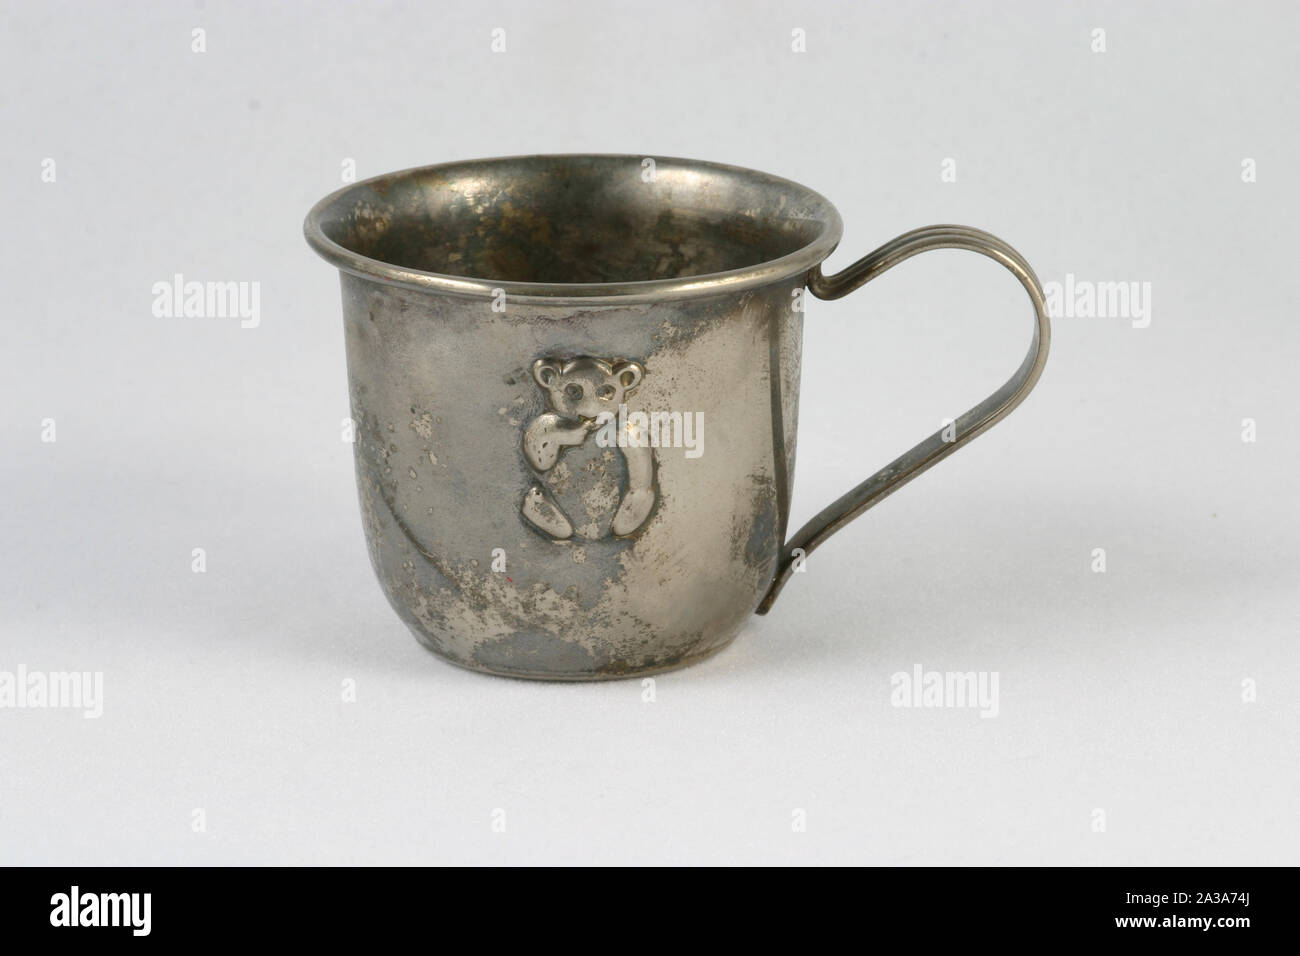 A child's old silver cup. Stock Photo